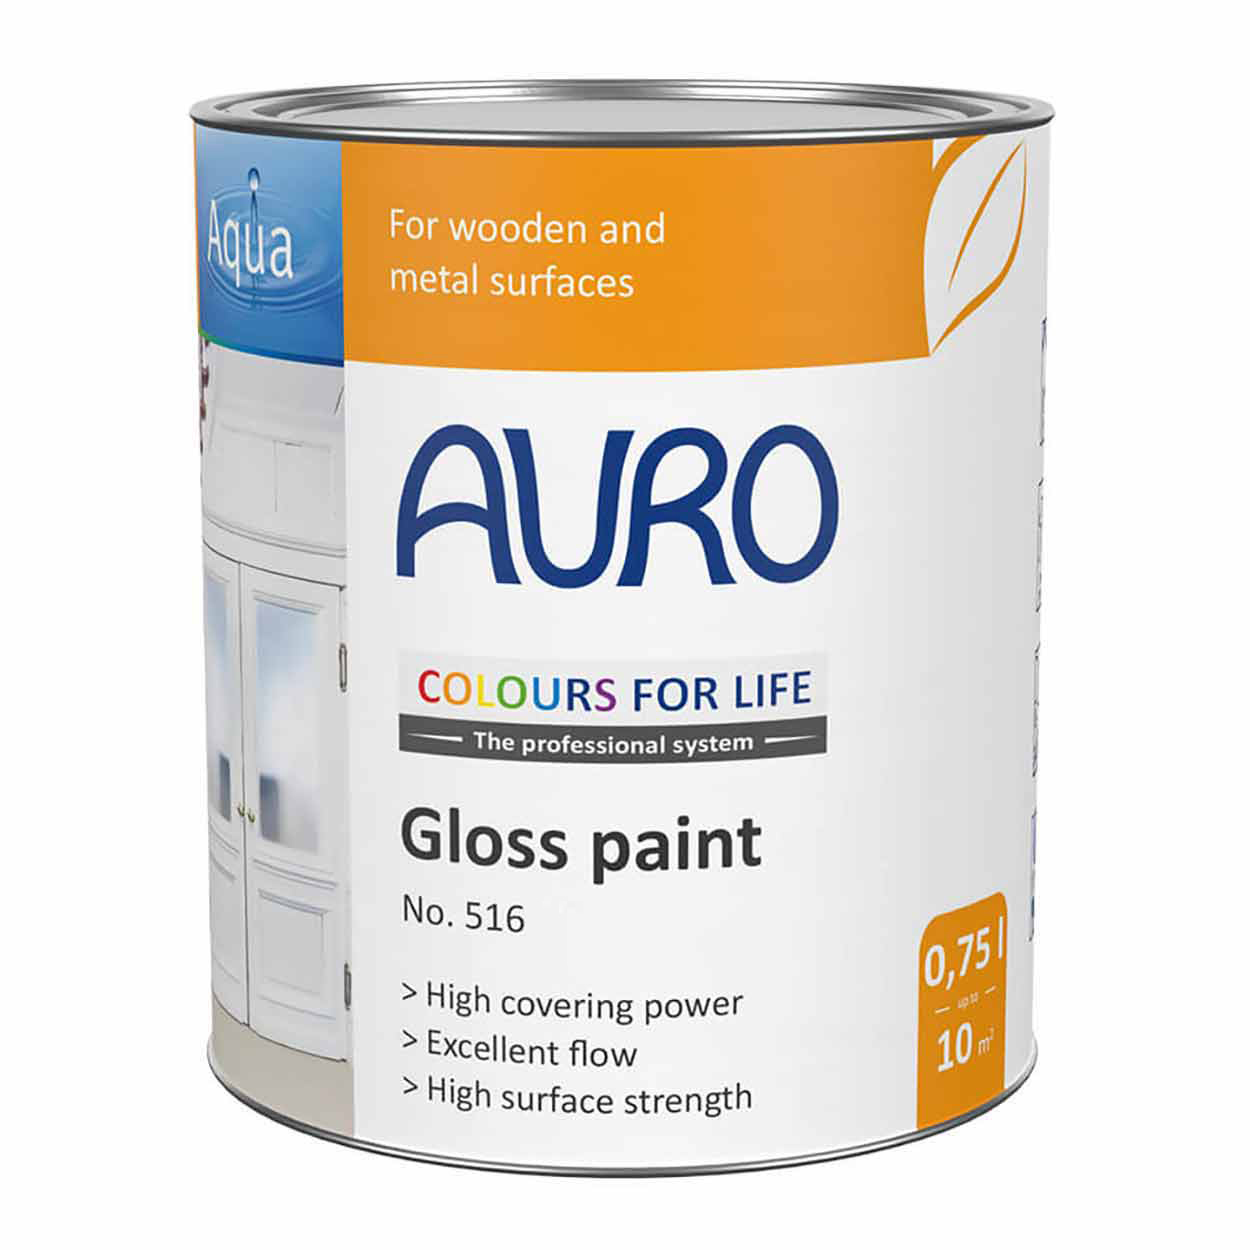 Auro Natural Gloss Paint for Wood - COLOURS - Interior & Exterior - Auro 516